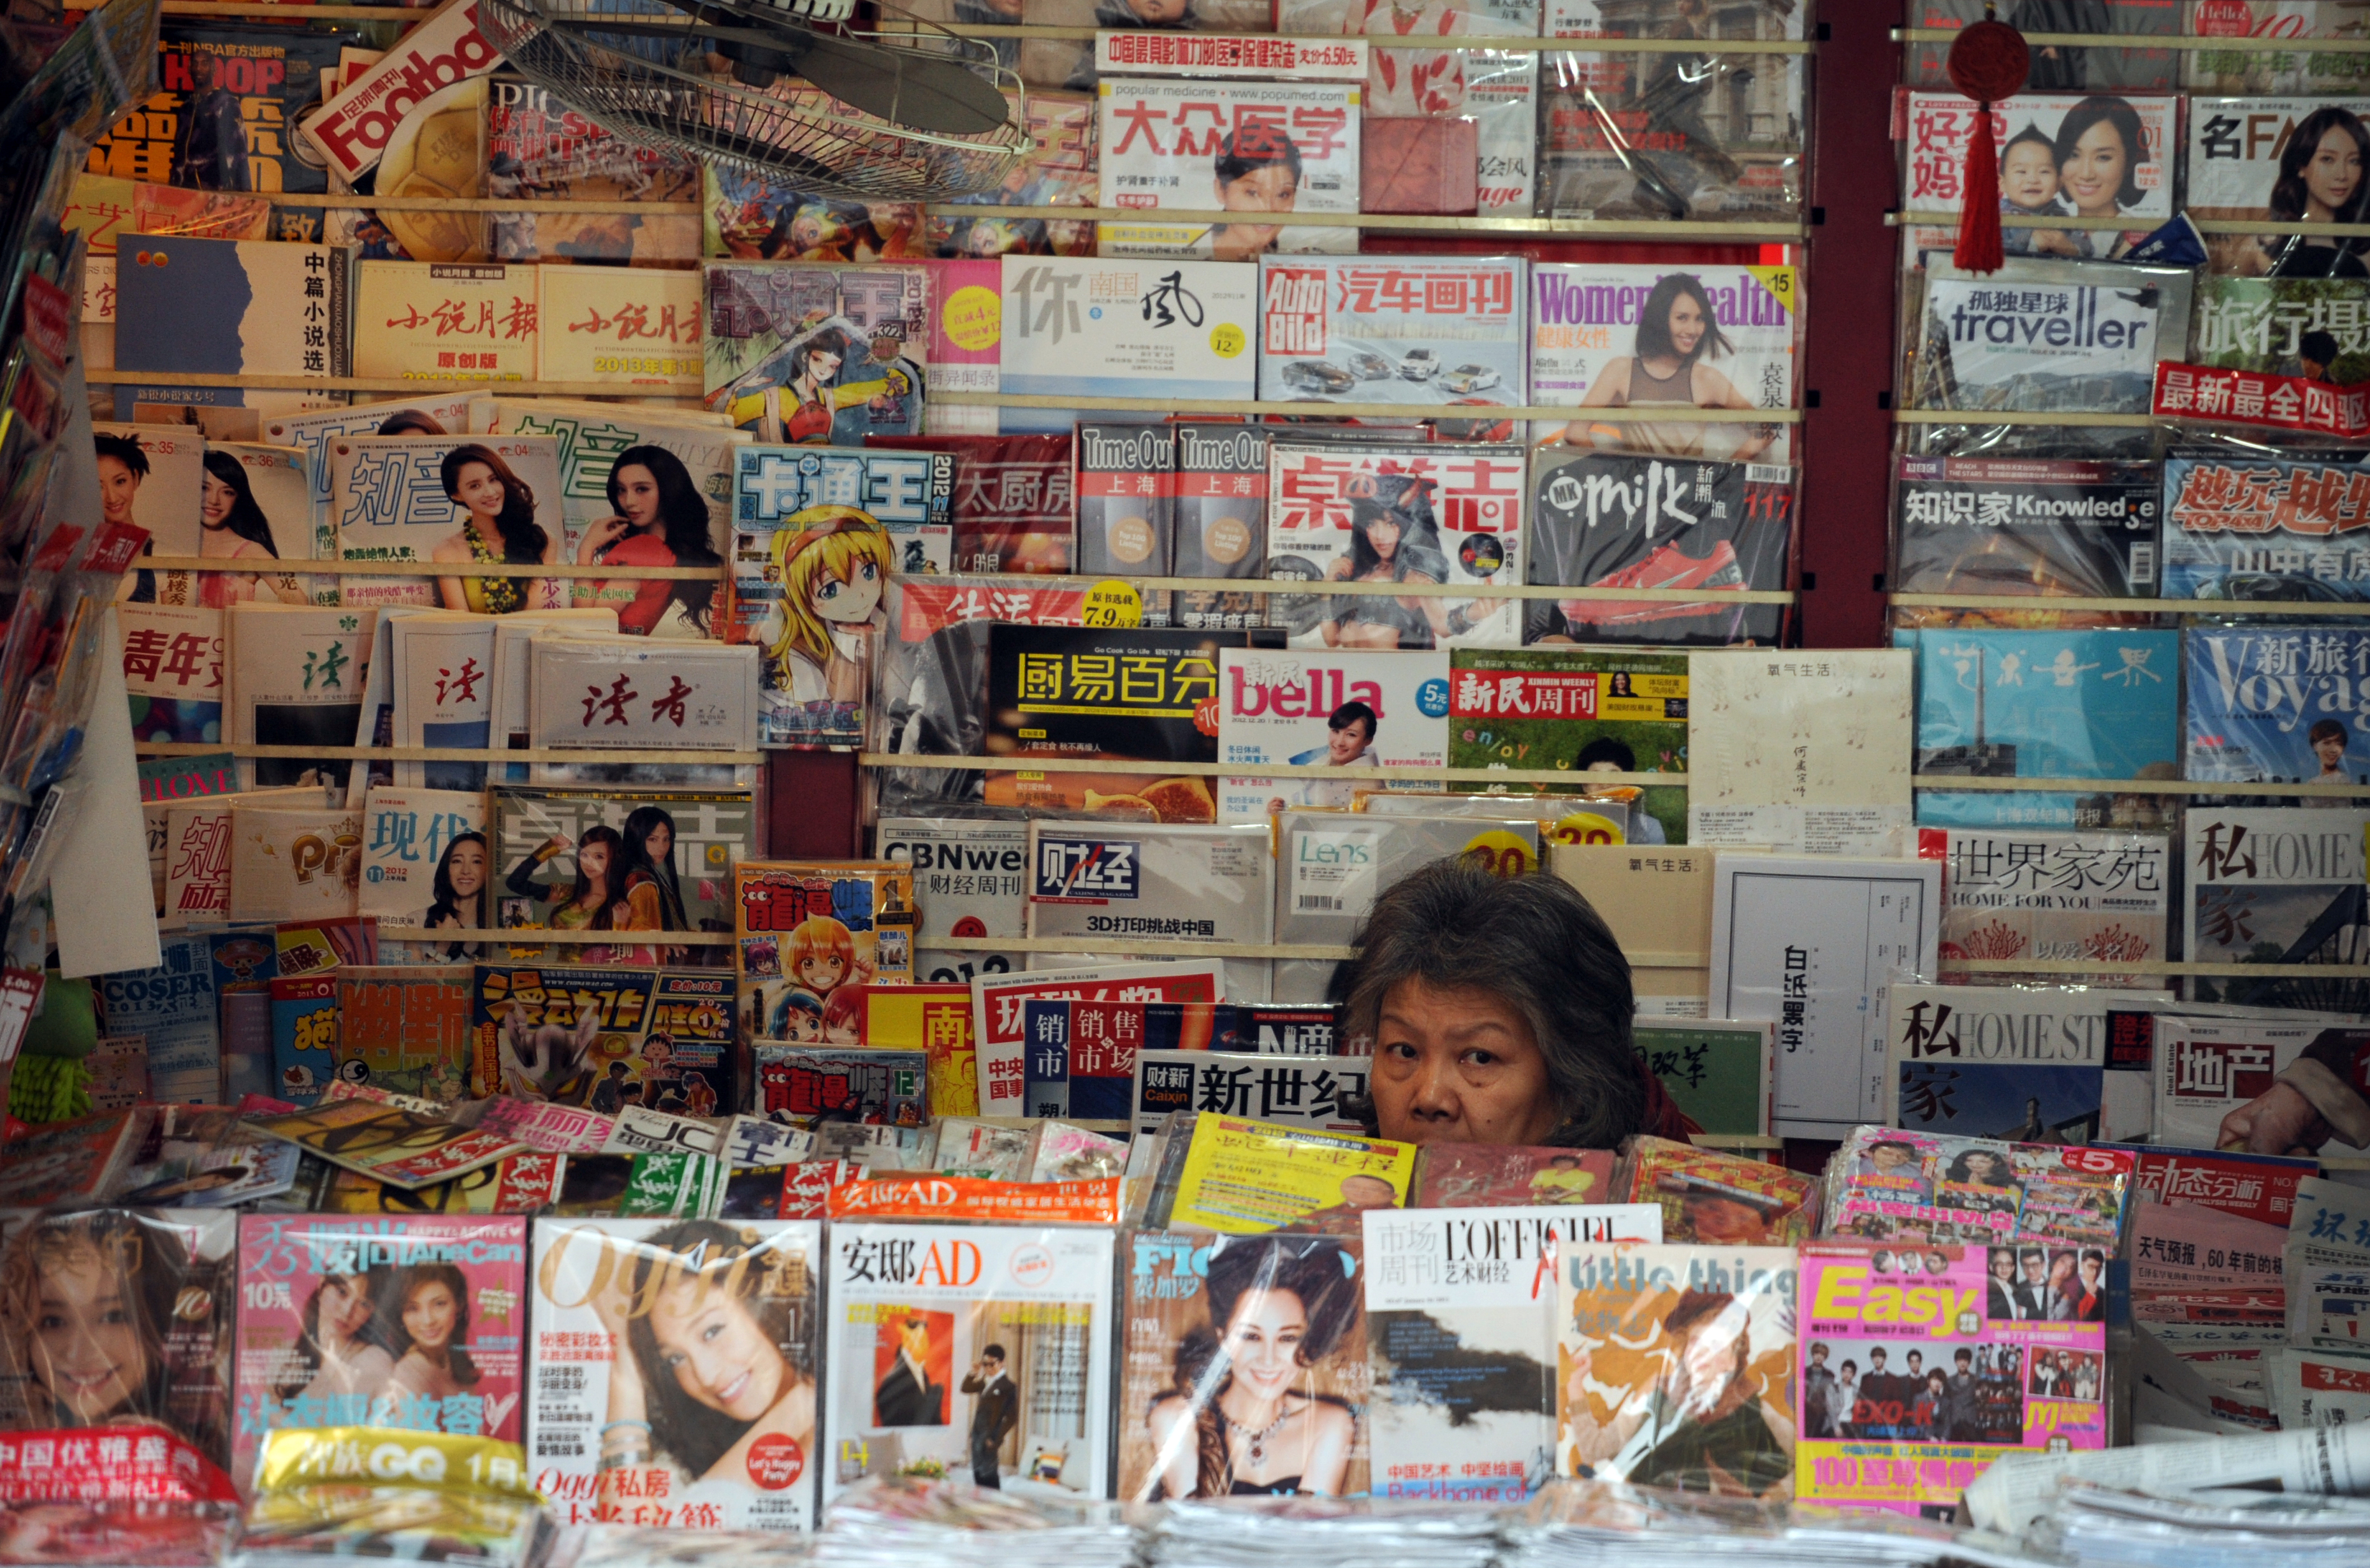 A newspaper vendor looks out from her booth on a street in Shanghai on Jan. 8, 2013 (Peter Parks—AFP/Getty Images)